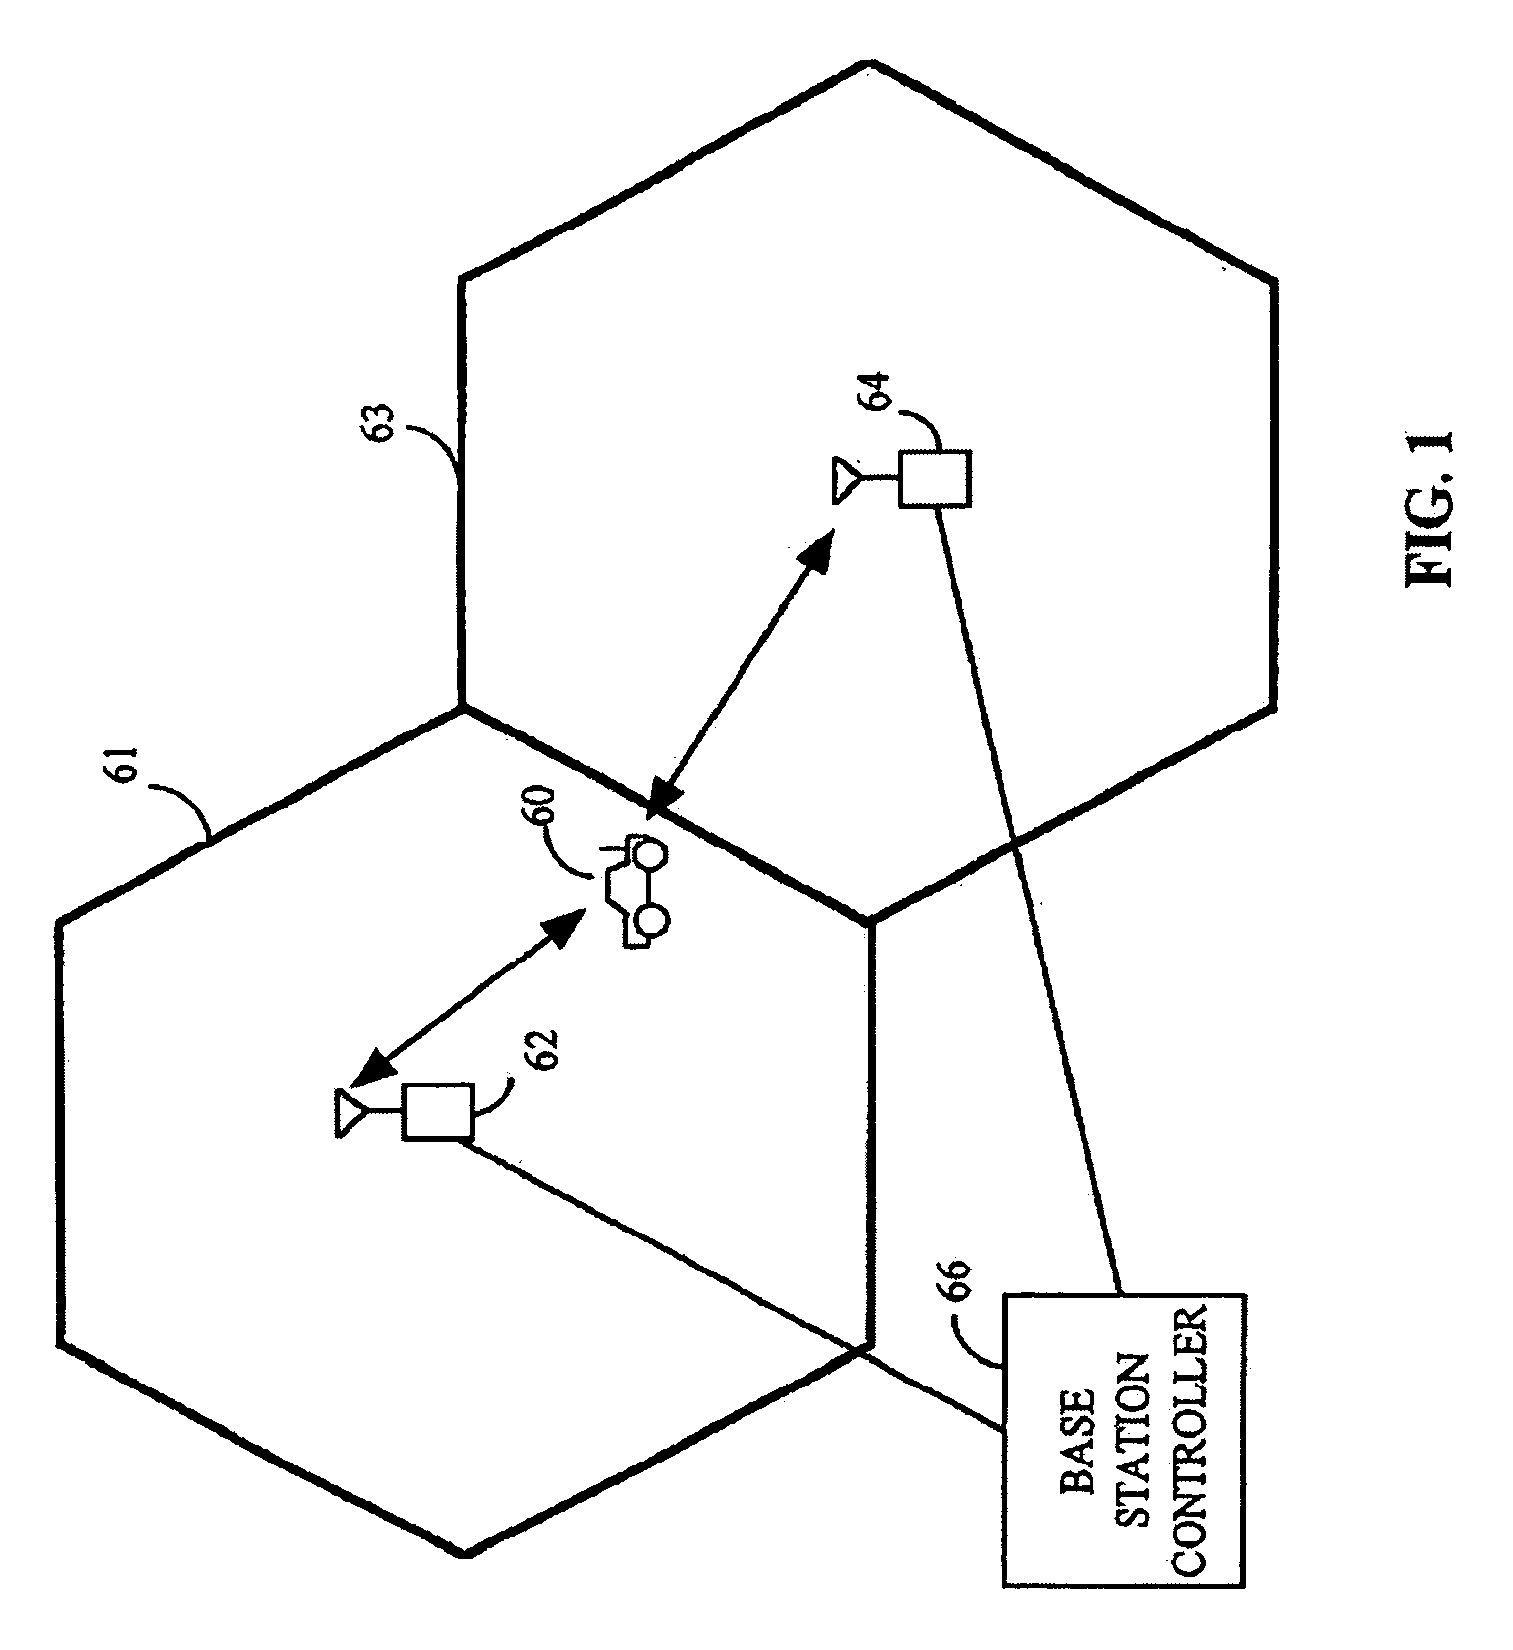 Mobile station assisted timing synchronization in a CDMA communication system